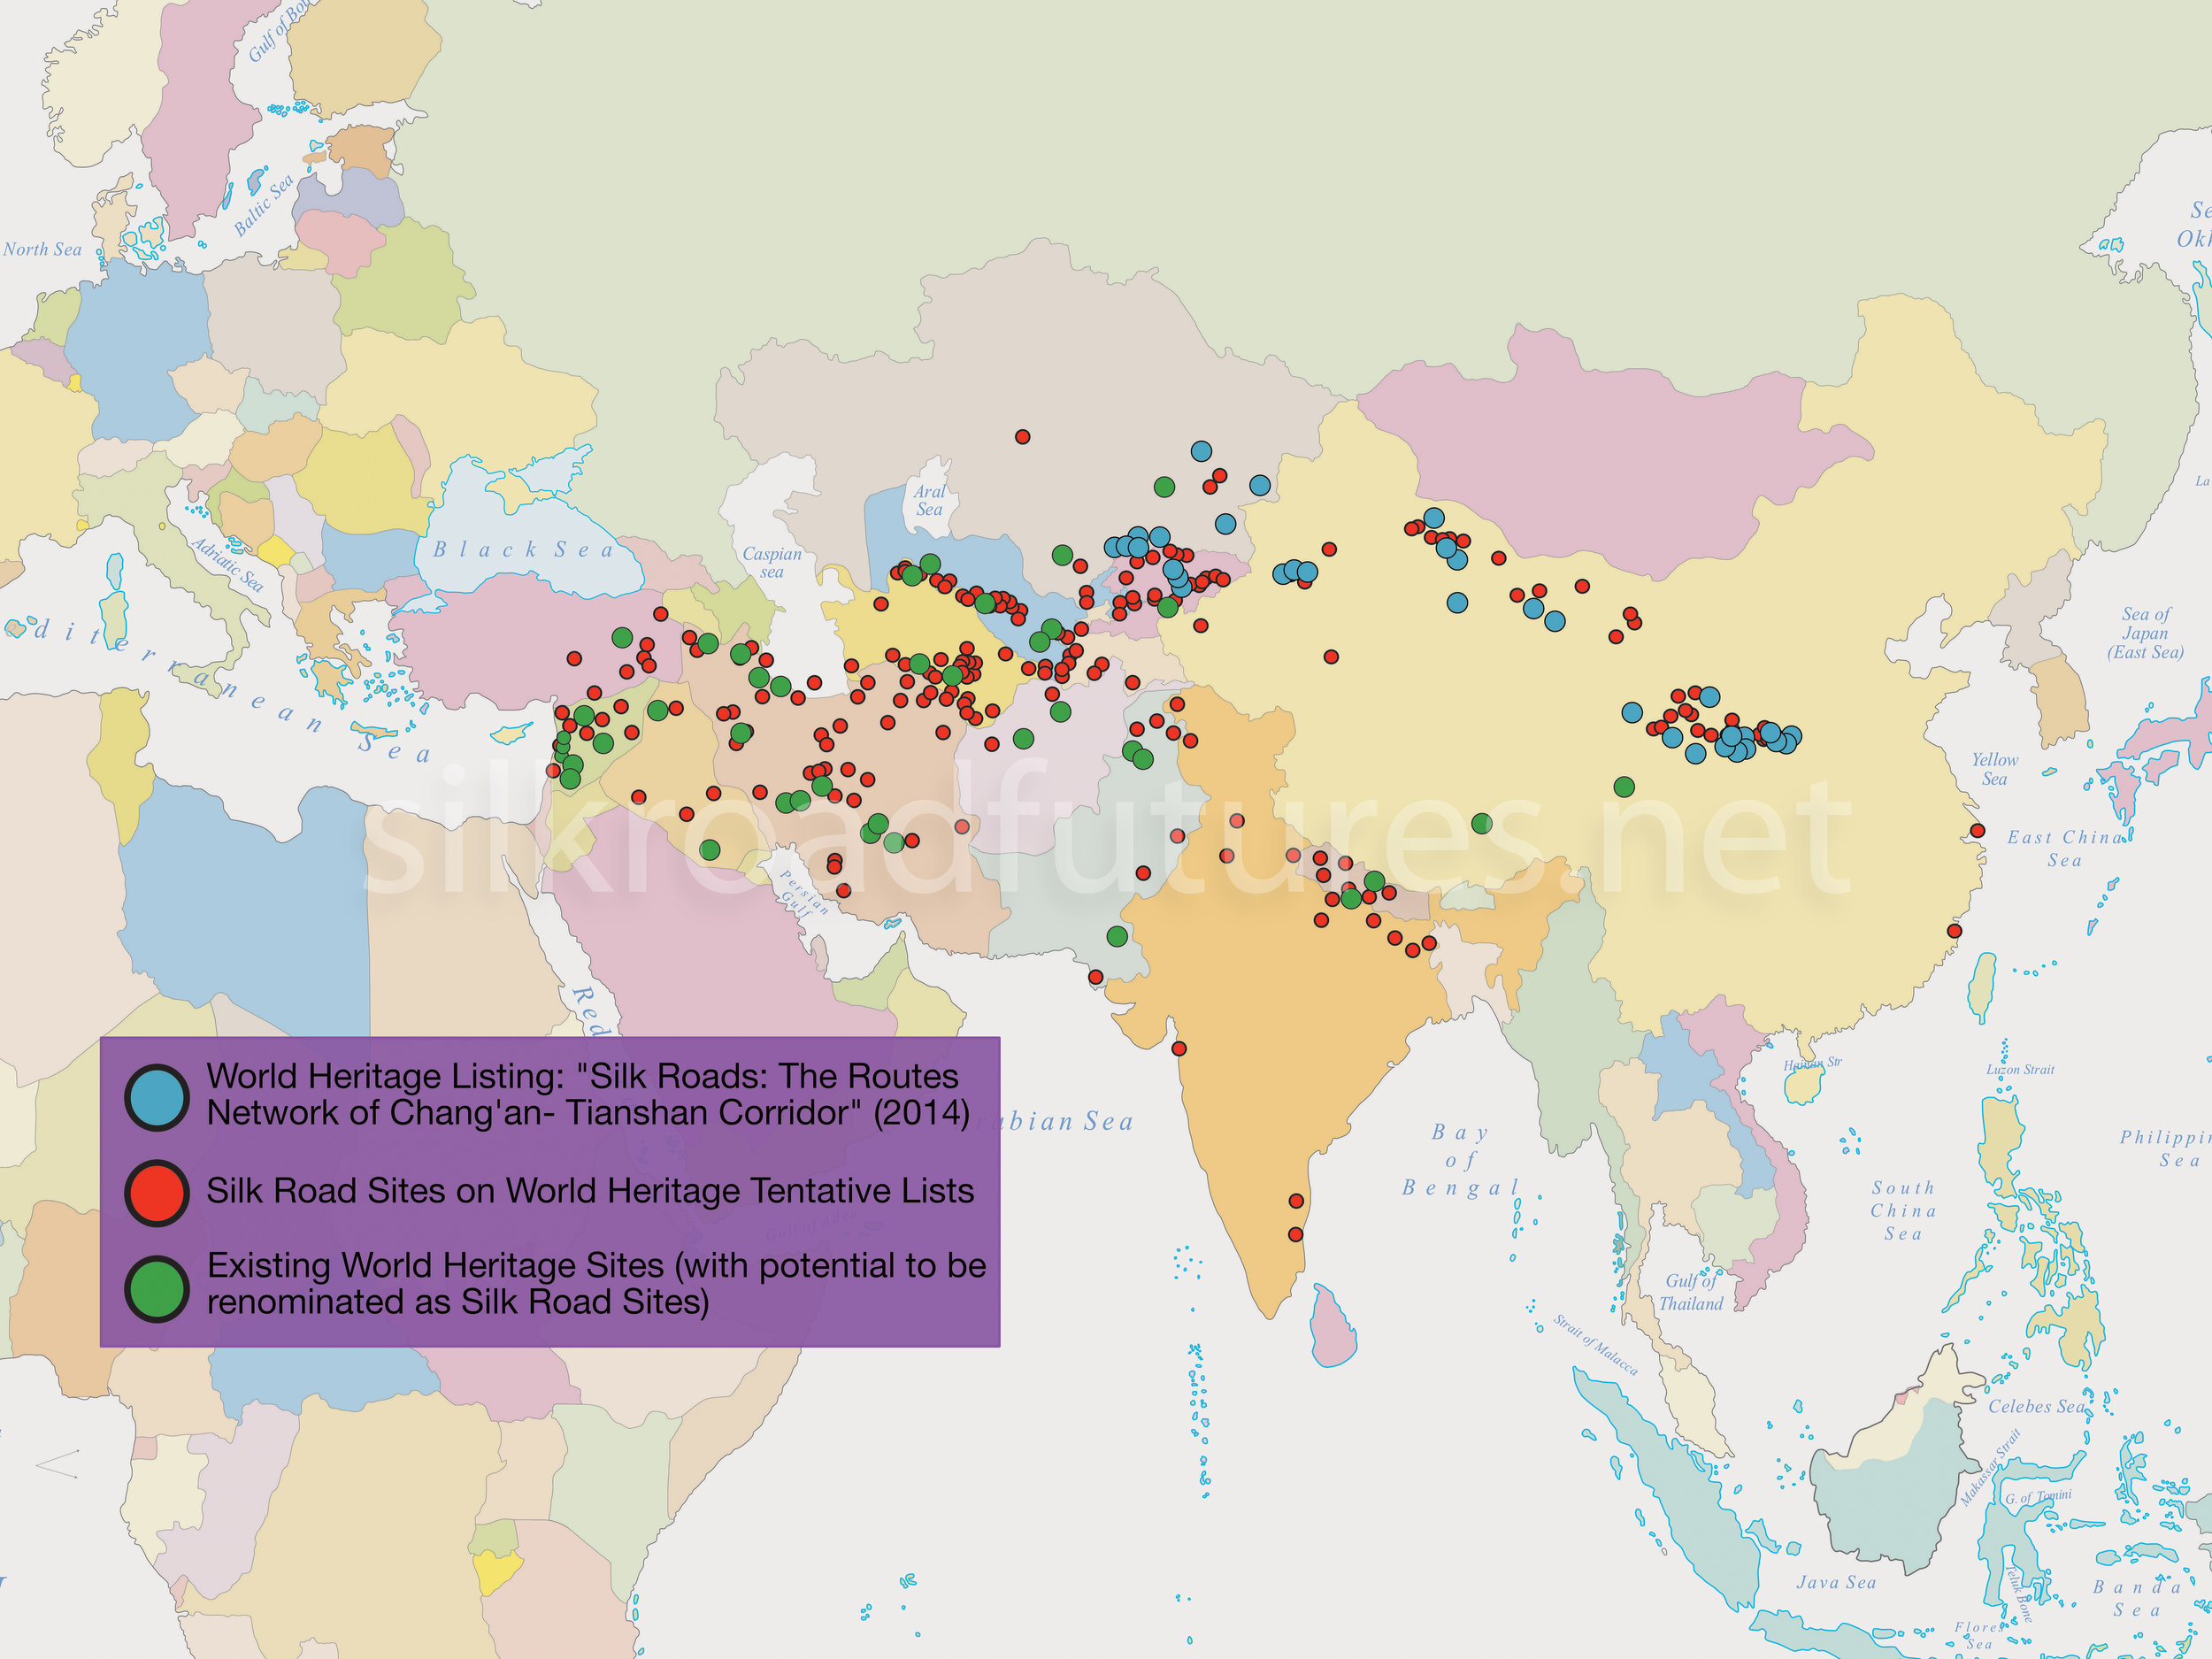 Silk Road Sites on WHS TLs and Existing WHS - ZOOMED IN - Cropped.jpg